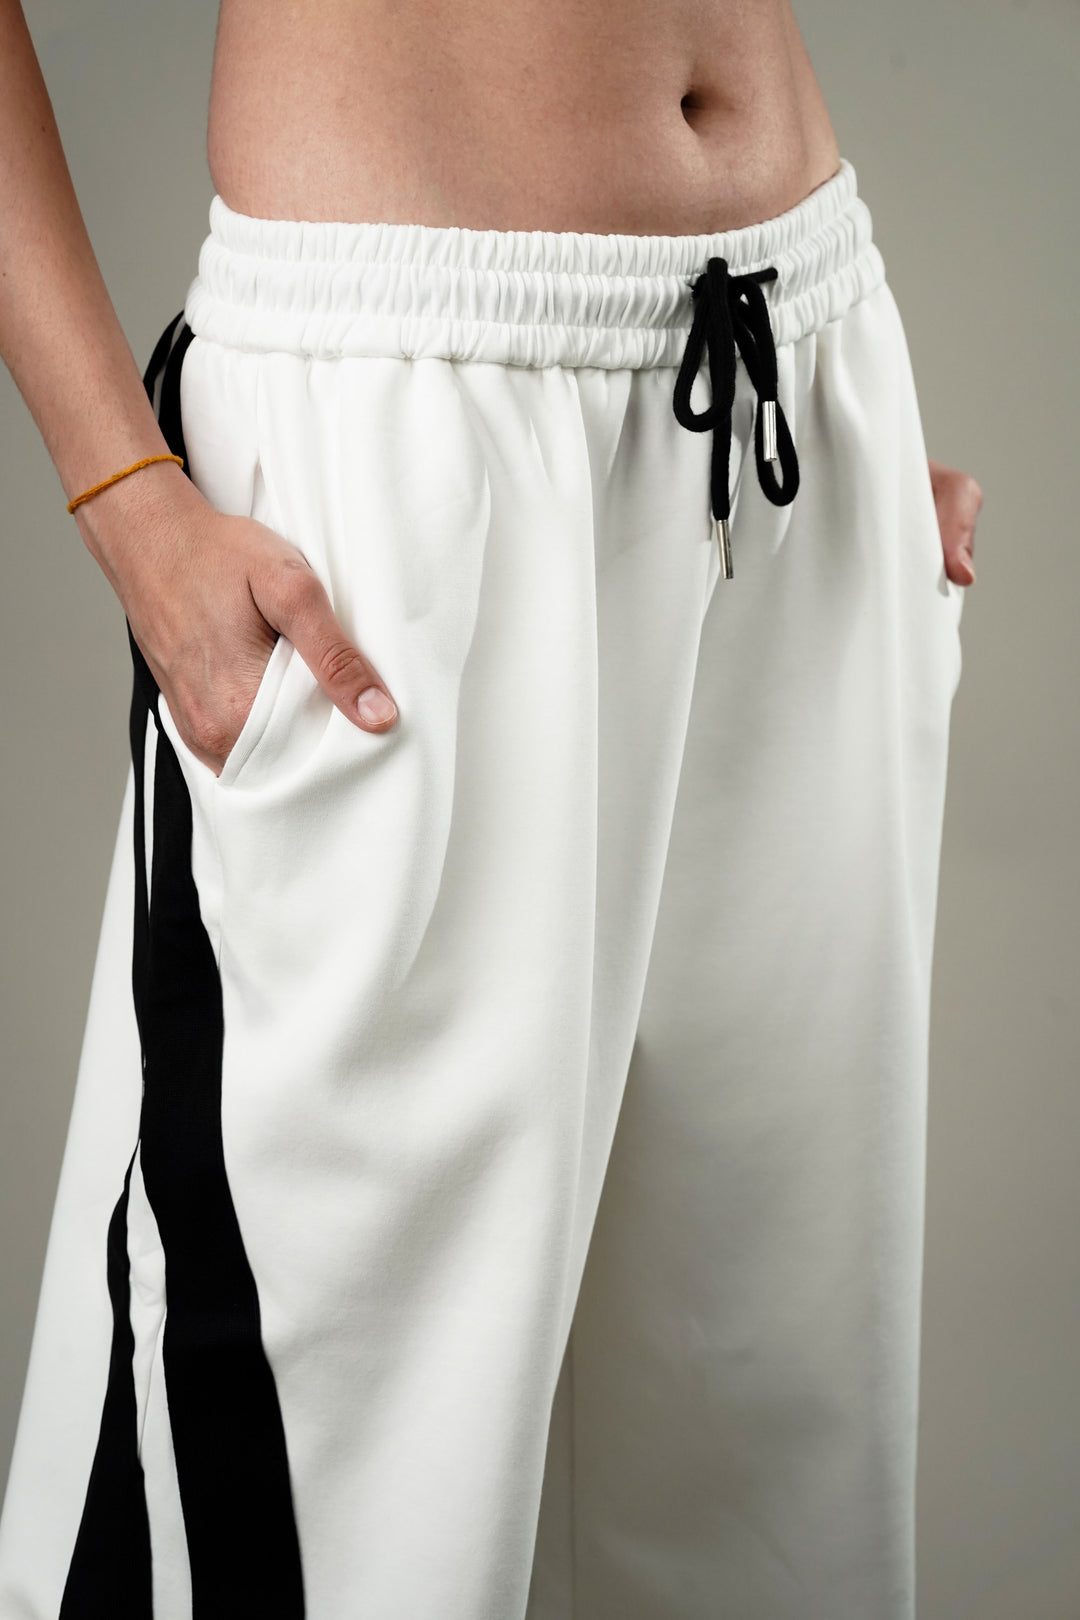 White side-stripe sweatpants for lounging